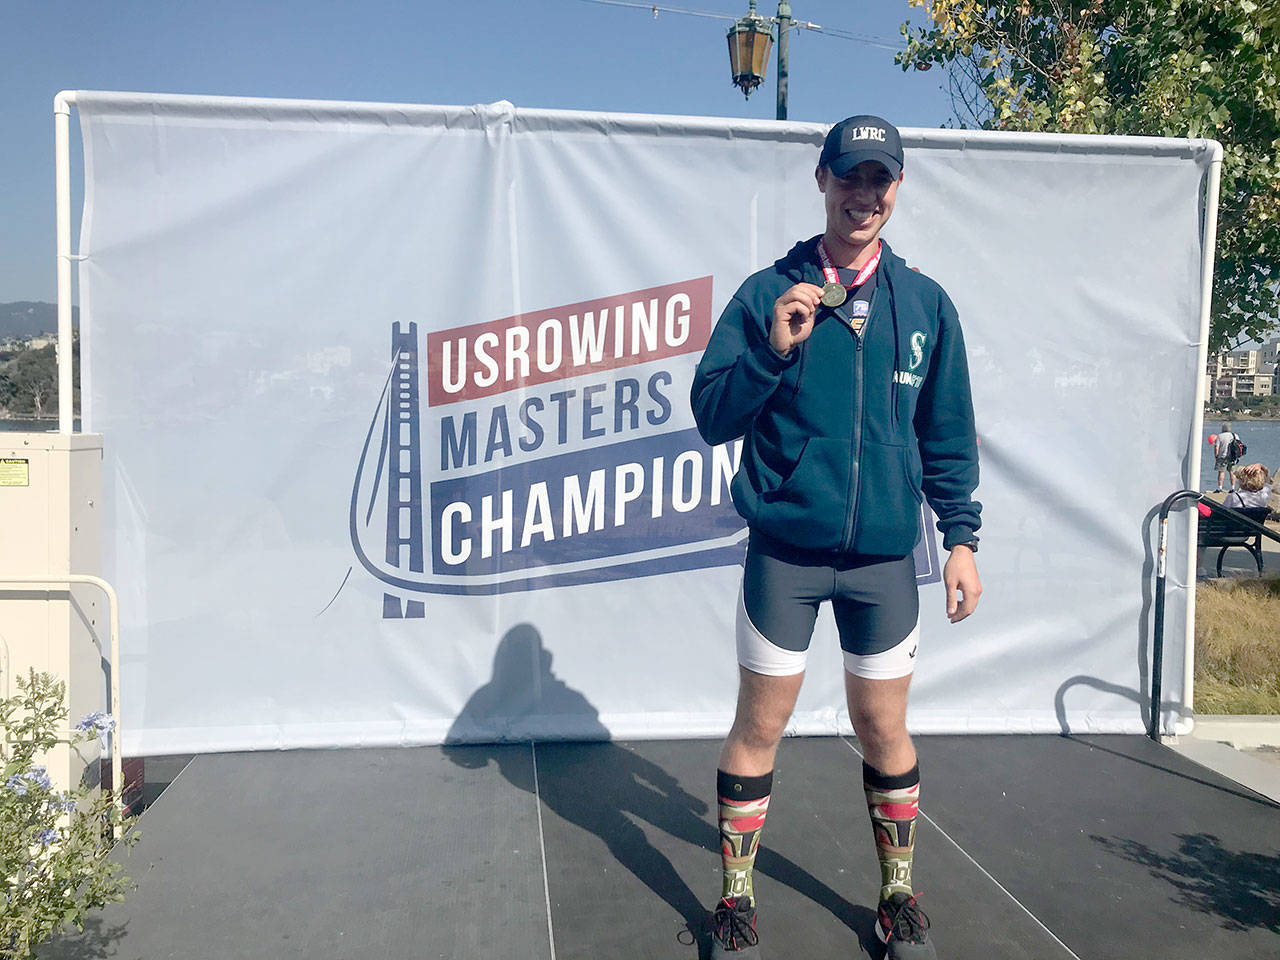 Photo courtesy of Cody Jenkins | Cody Jenkins earned the first-place spot in two single-rower events, both the Mens Open A 1X (Heat 1) and the Mens Open A 1X Final at the USRowing Masters National Championship on Lake Merritt in Oakland, California.